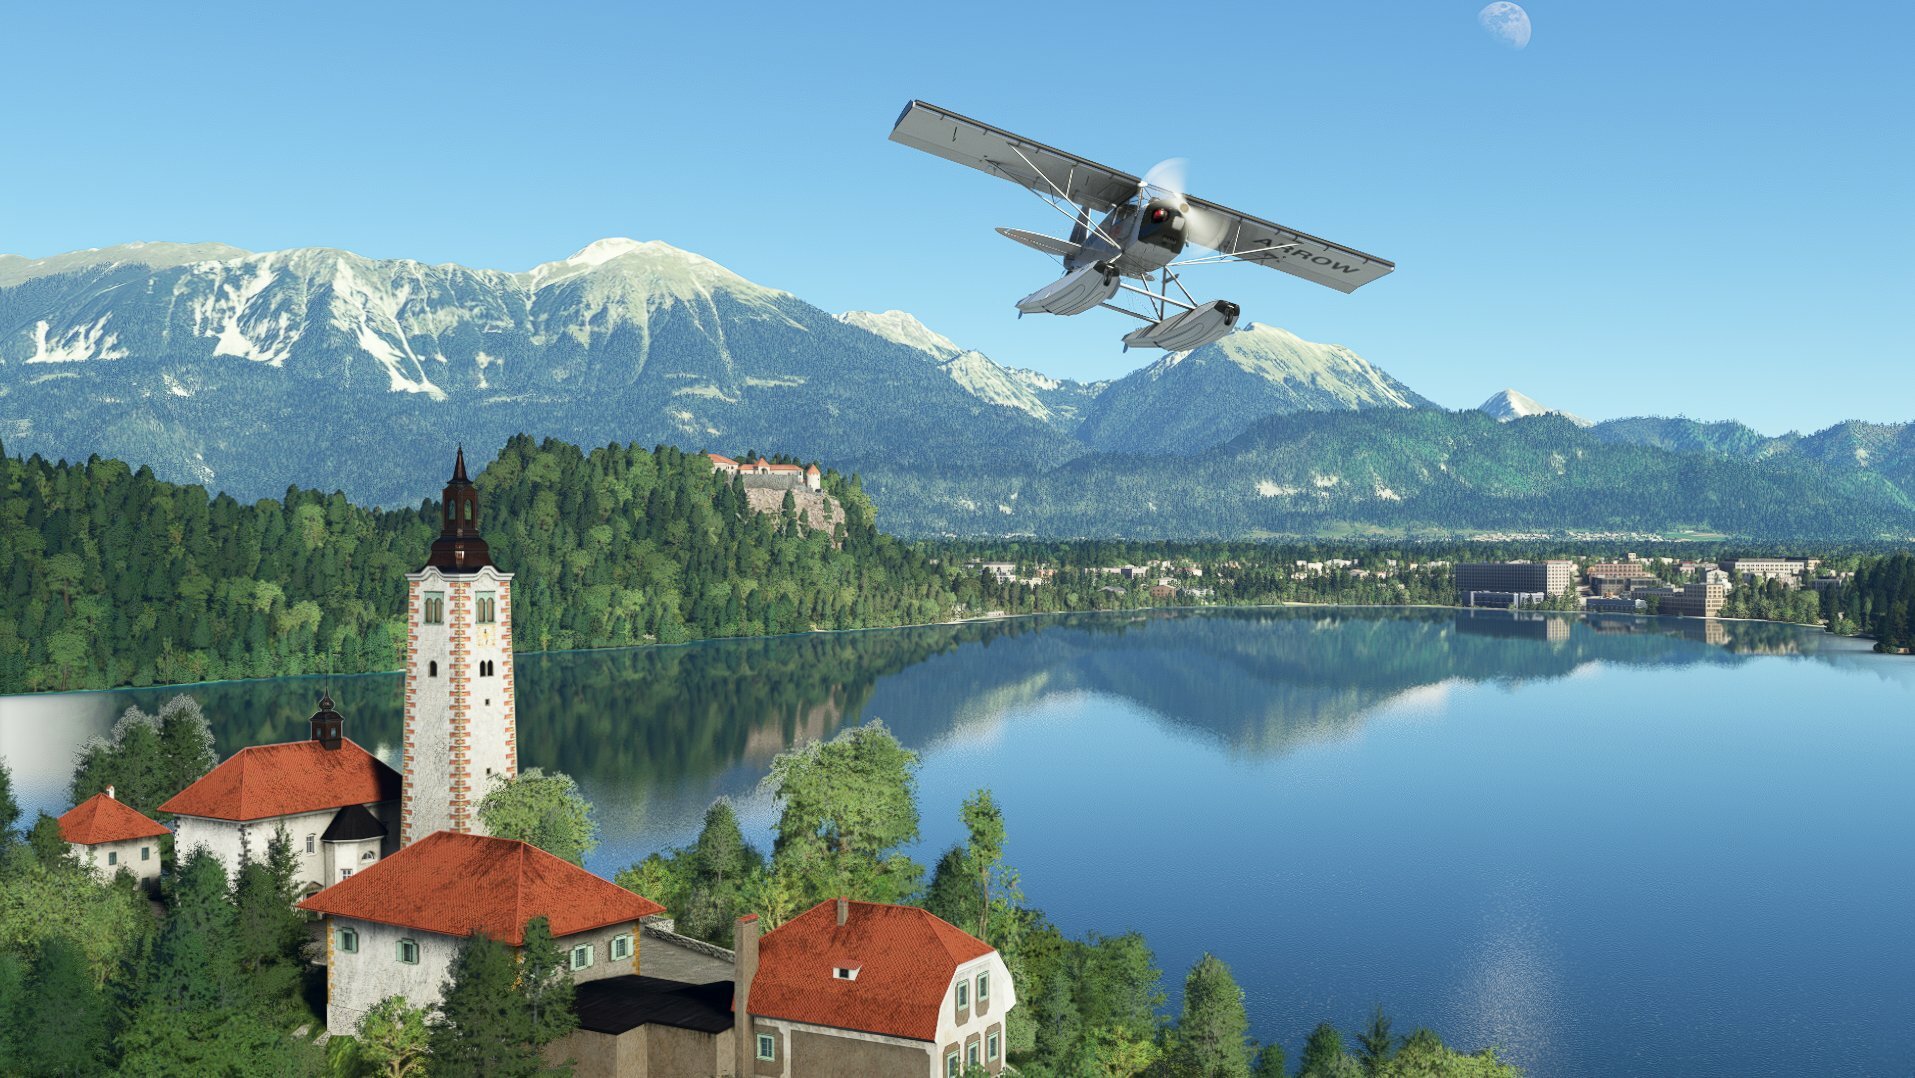 Sim Update 13 Beta is Now Available for Microsoft Flight Simulator